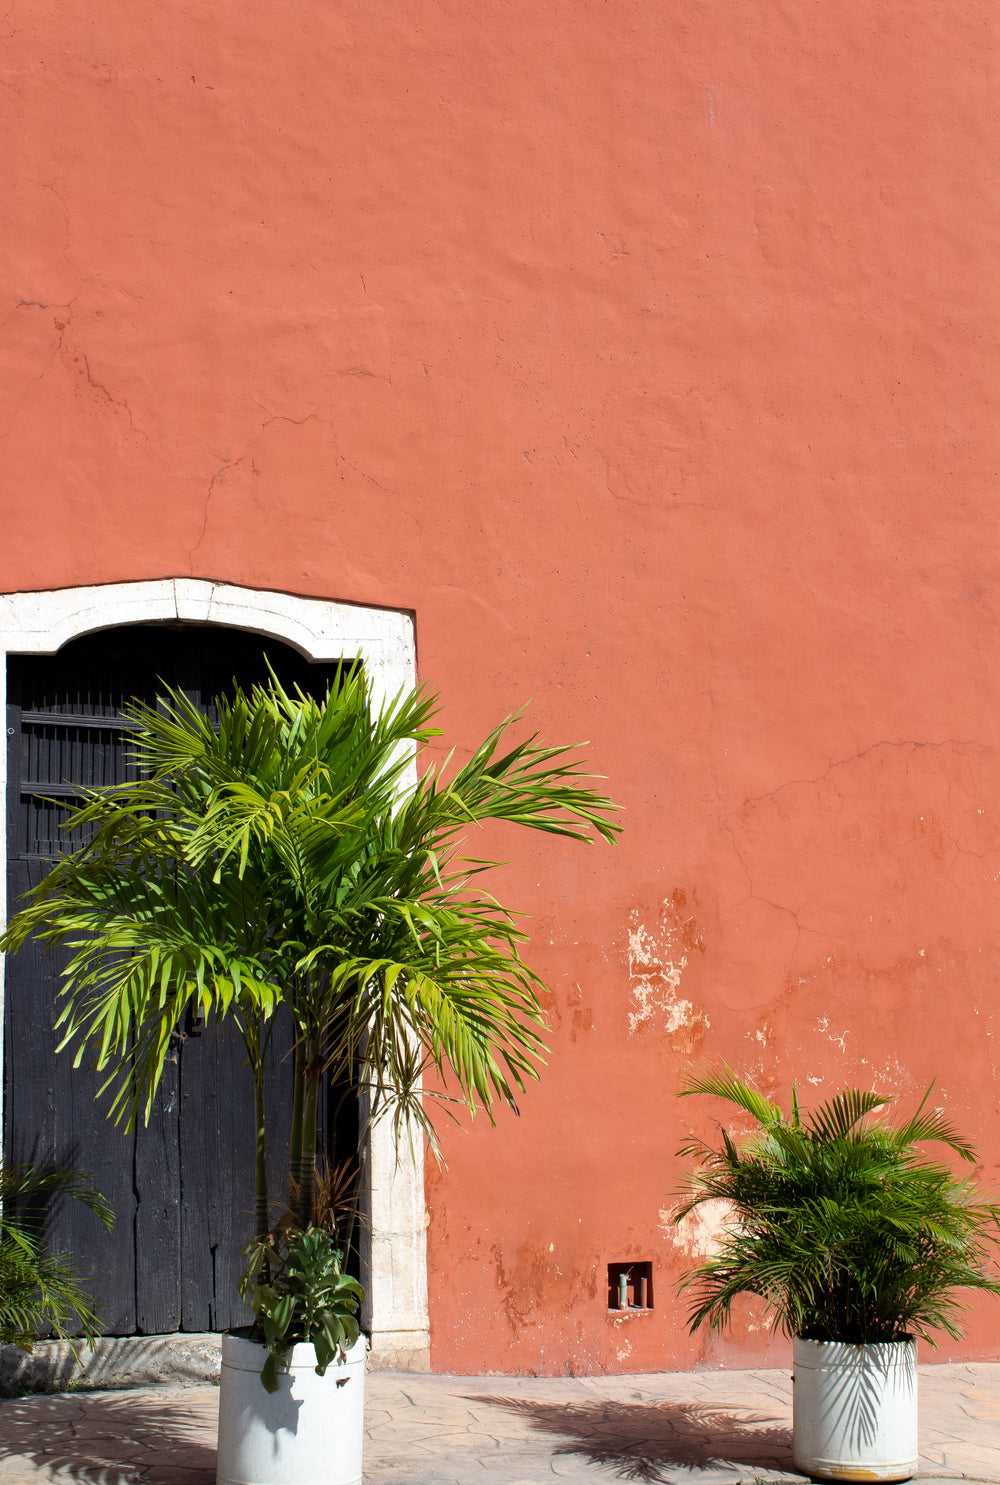 palms against a red plaster wall